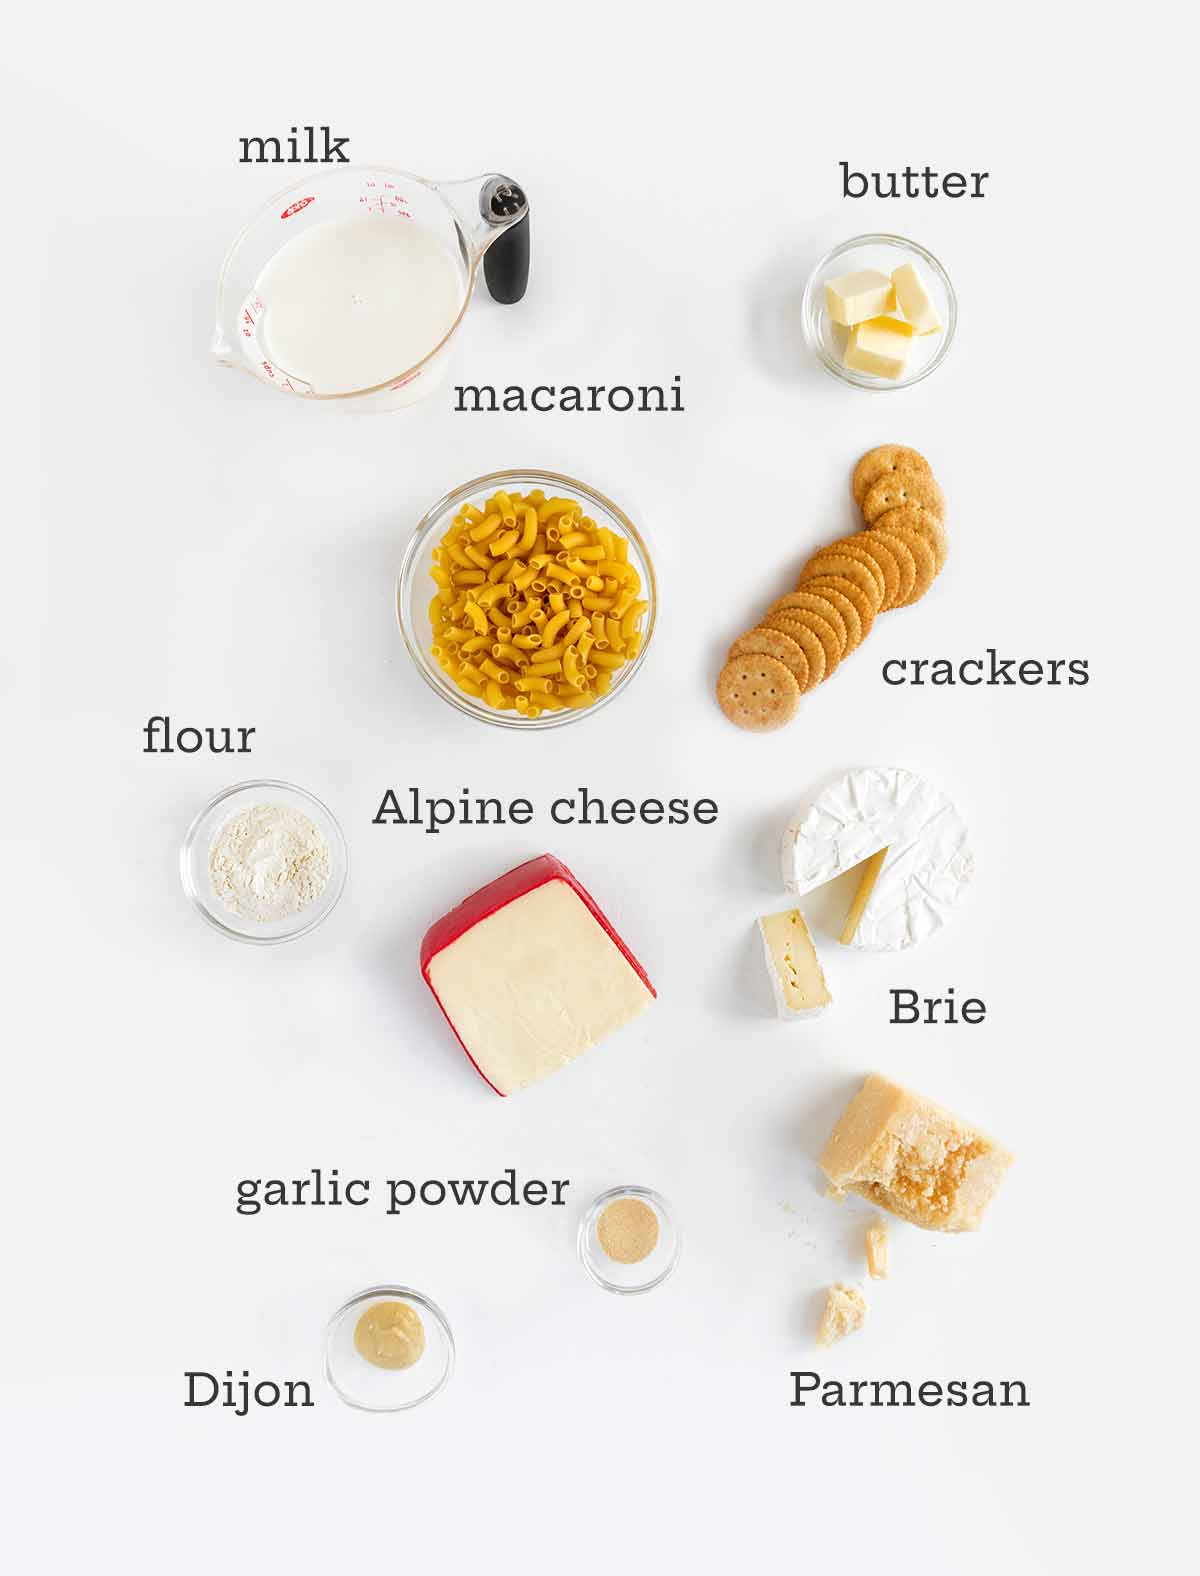 Ingredients for Brie mac and cheese -- Brie, pasta, crackers, butter, milk, flour, cheese, butter, garlic powder, and Dijon.